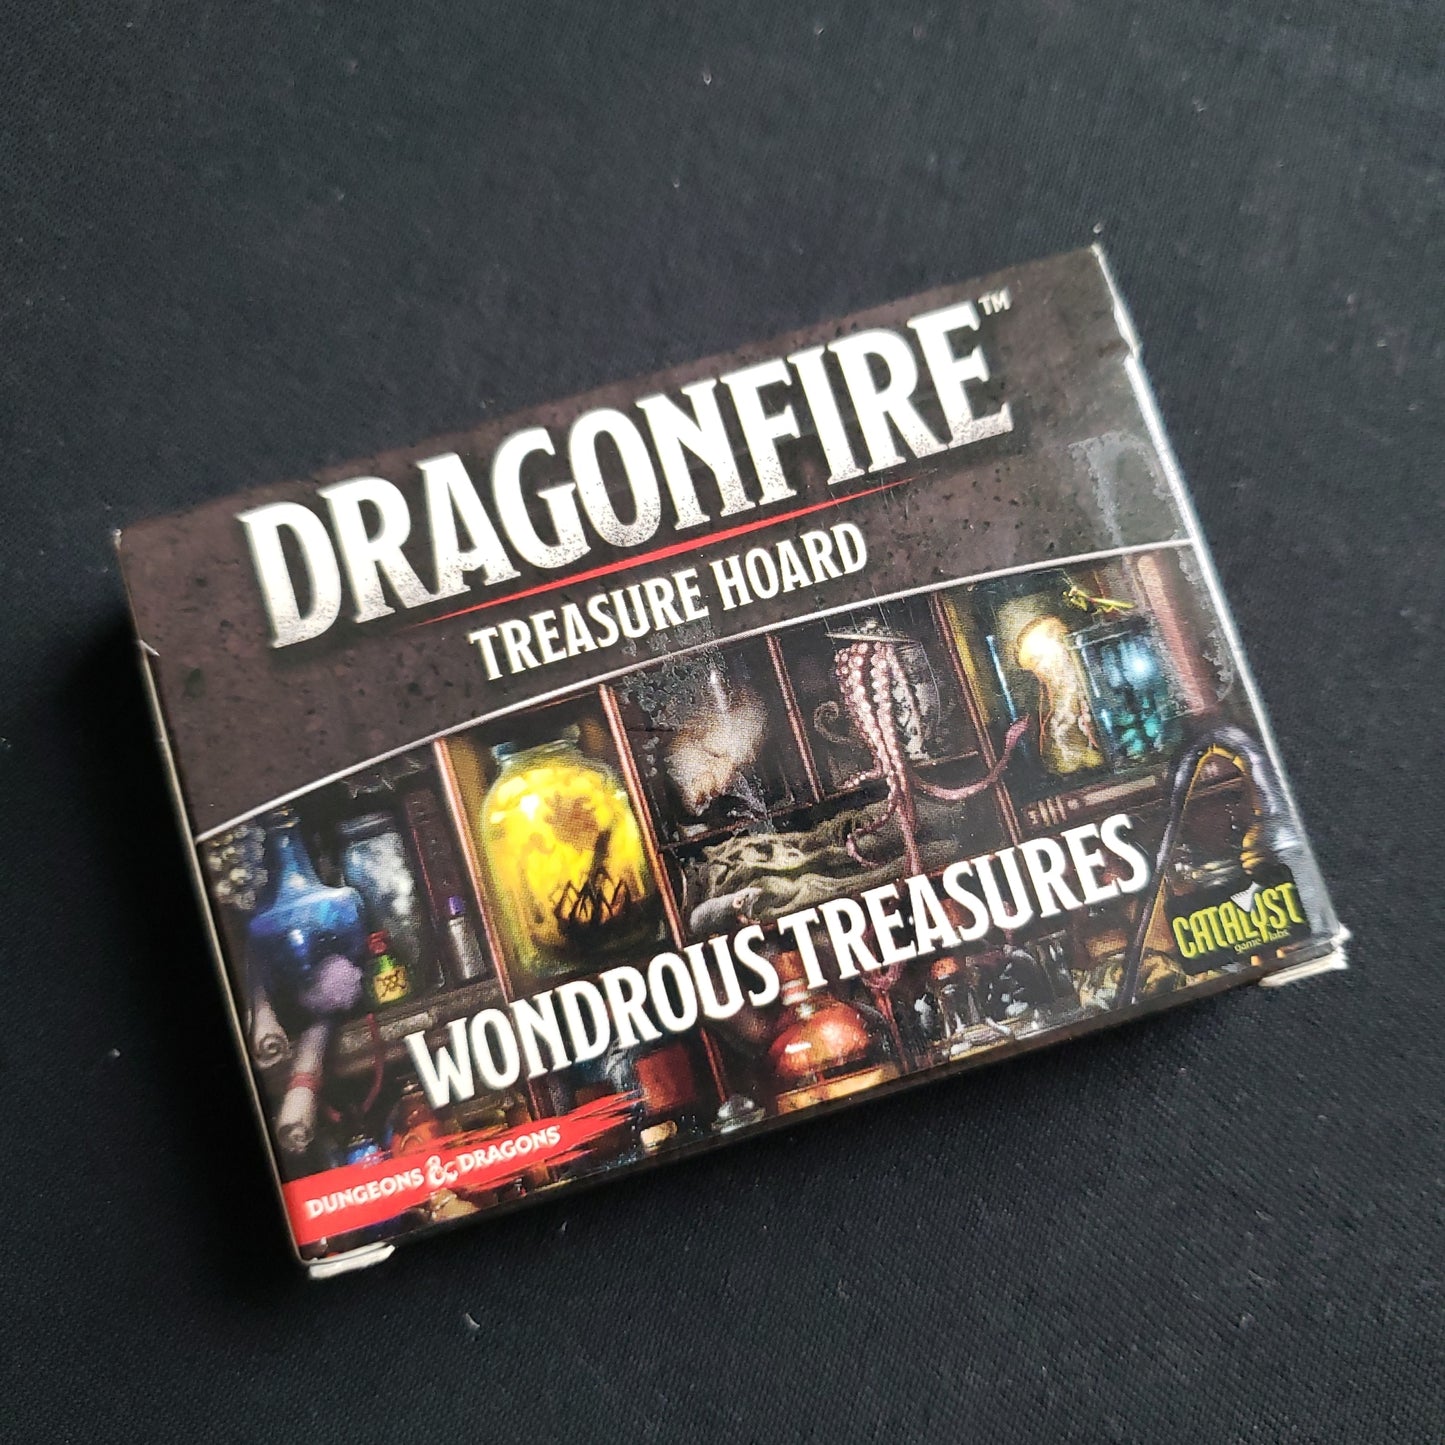 Image shows the front of the box for the Wonderous Treasures Expansion for the Dragonfire board game